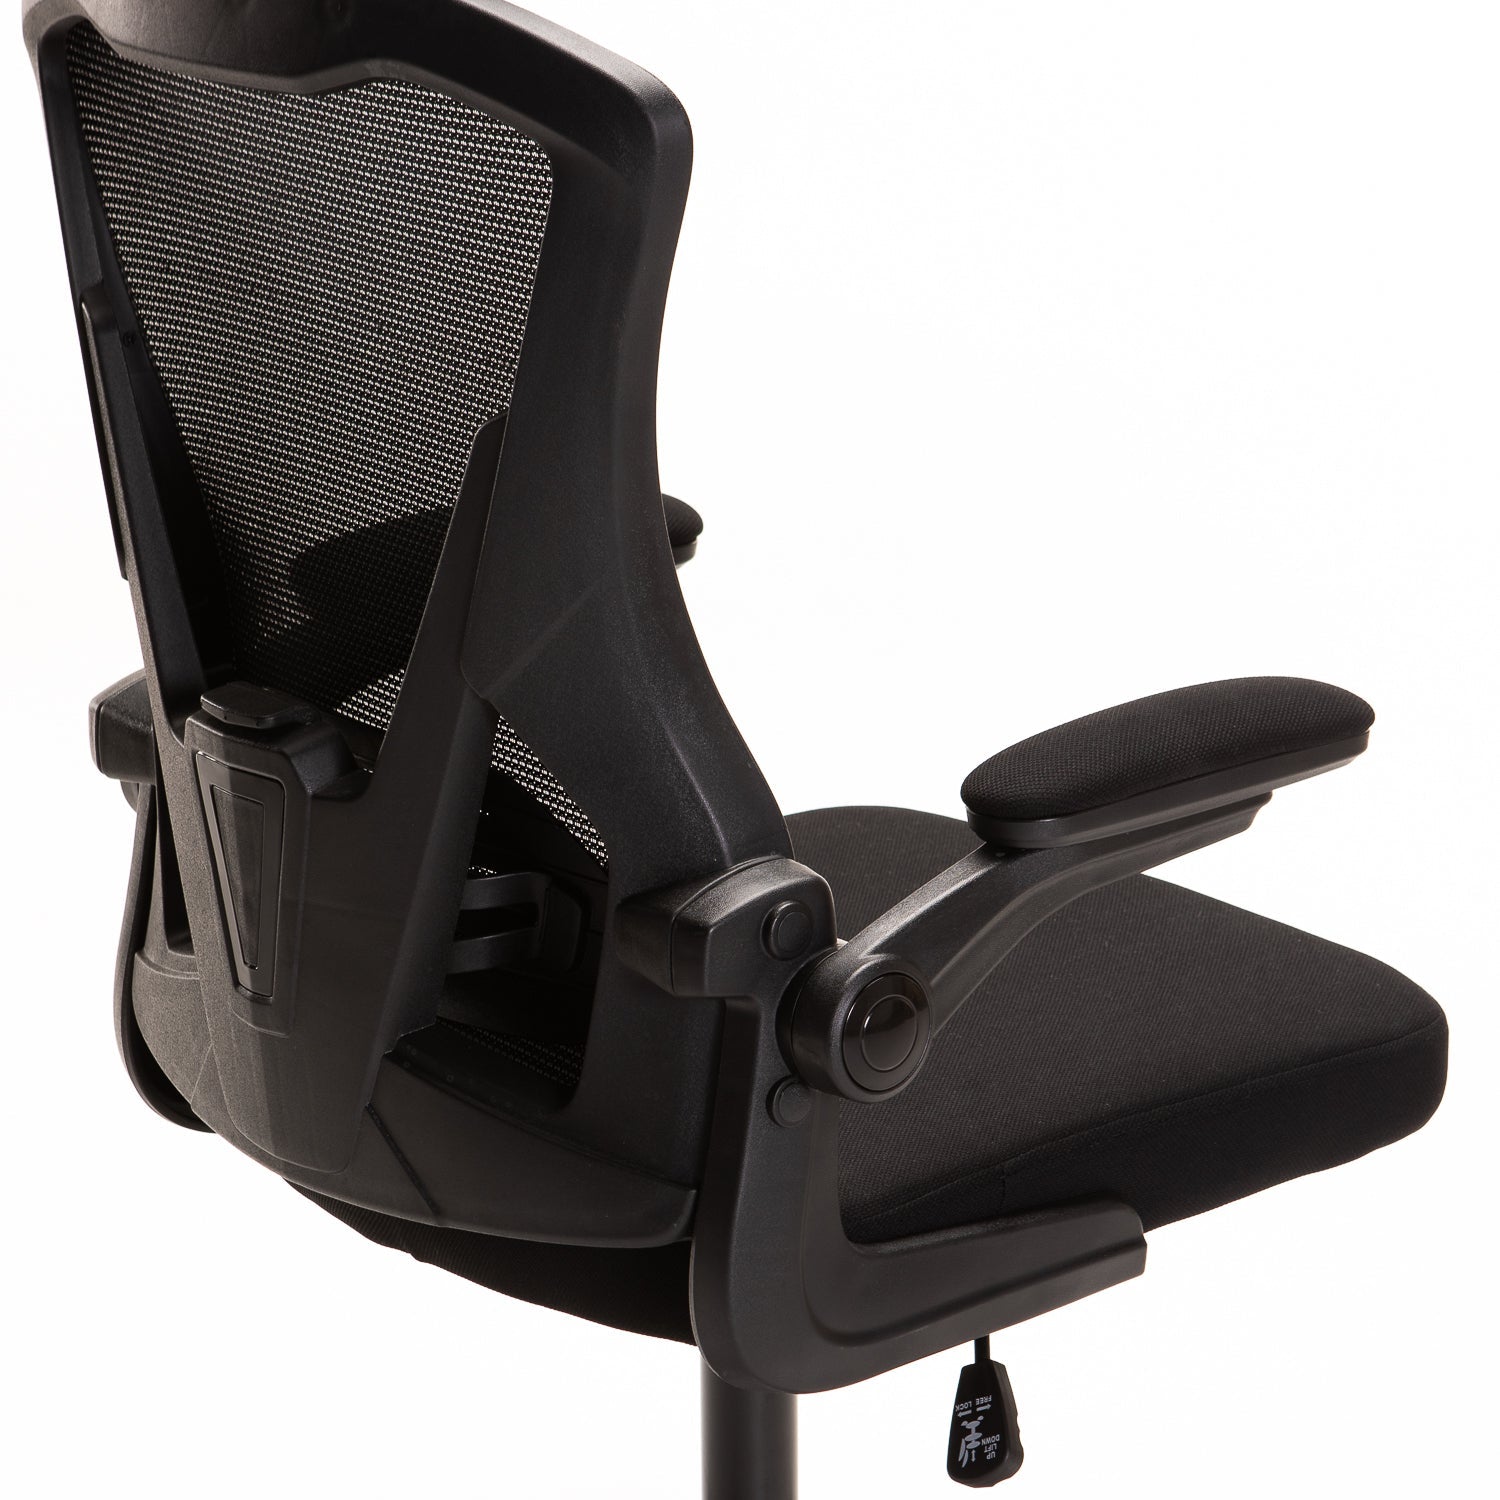 HIGHBACK DELUXE OFFICE CHAIR AH571A